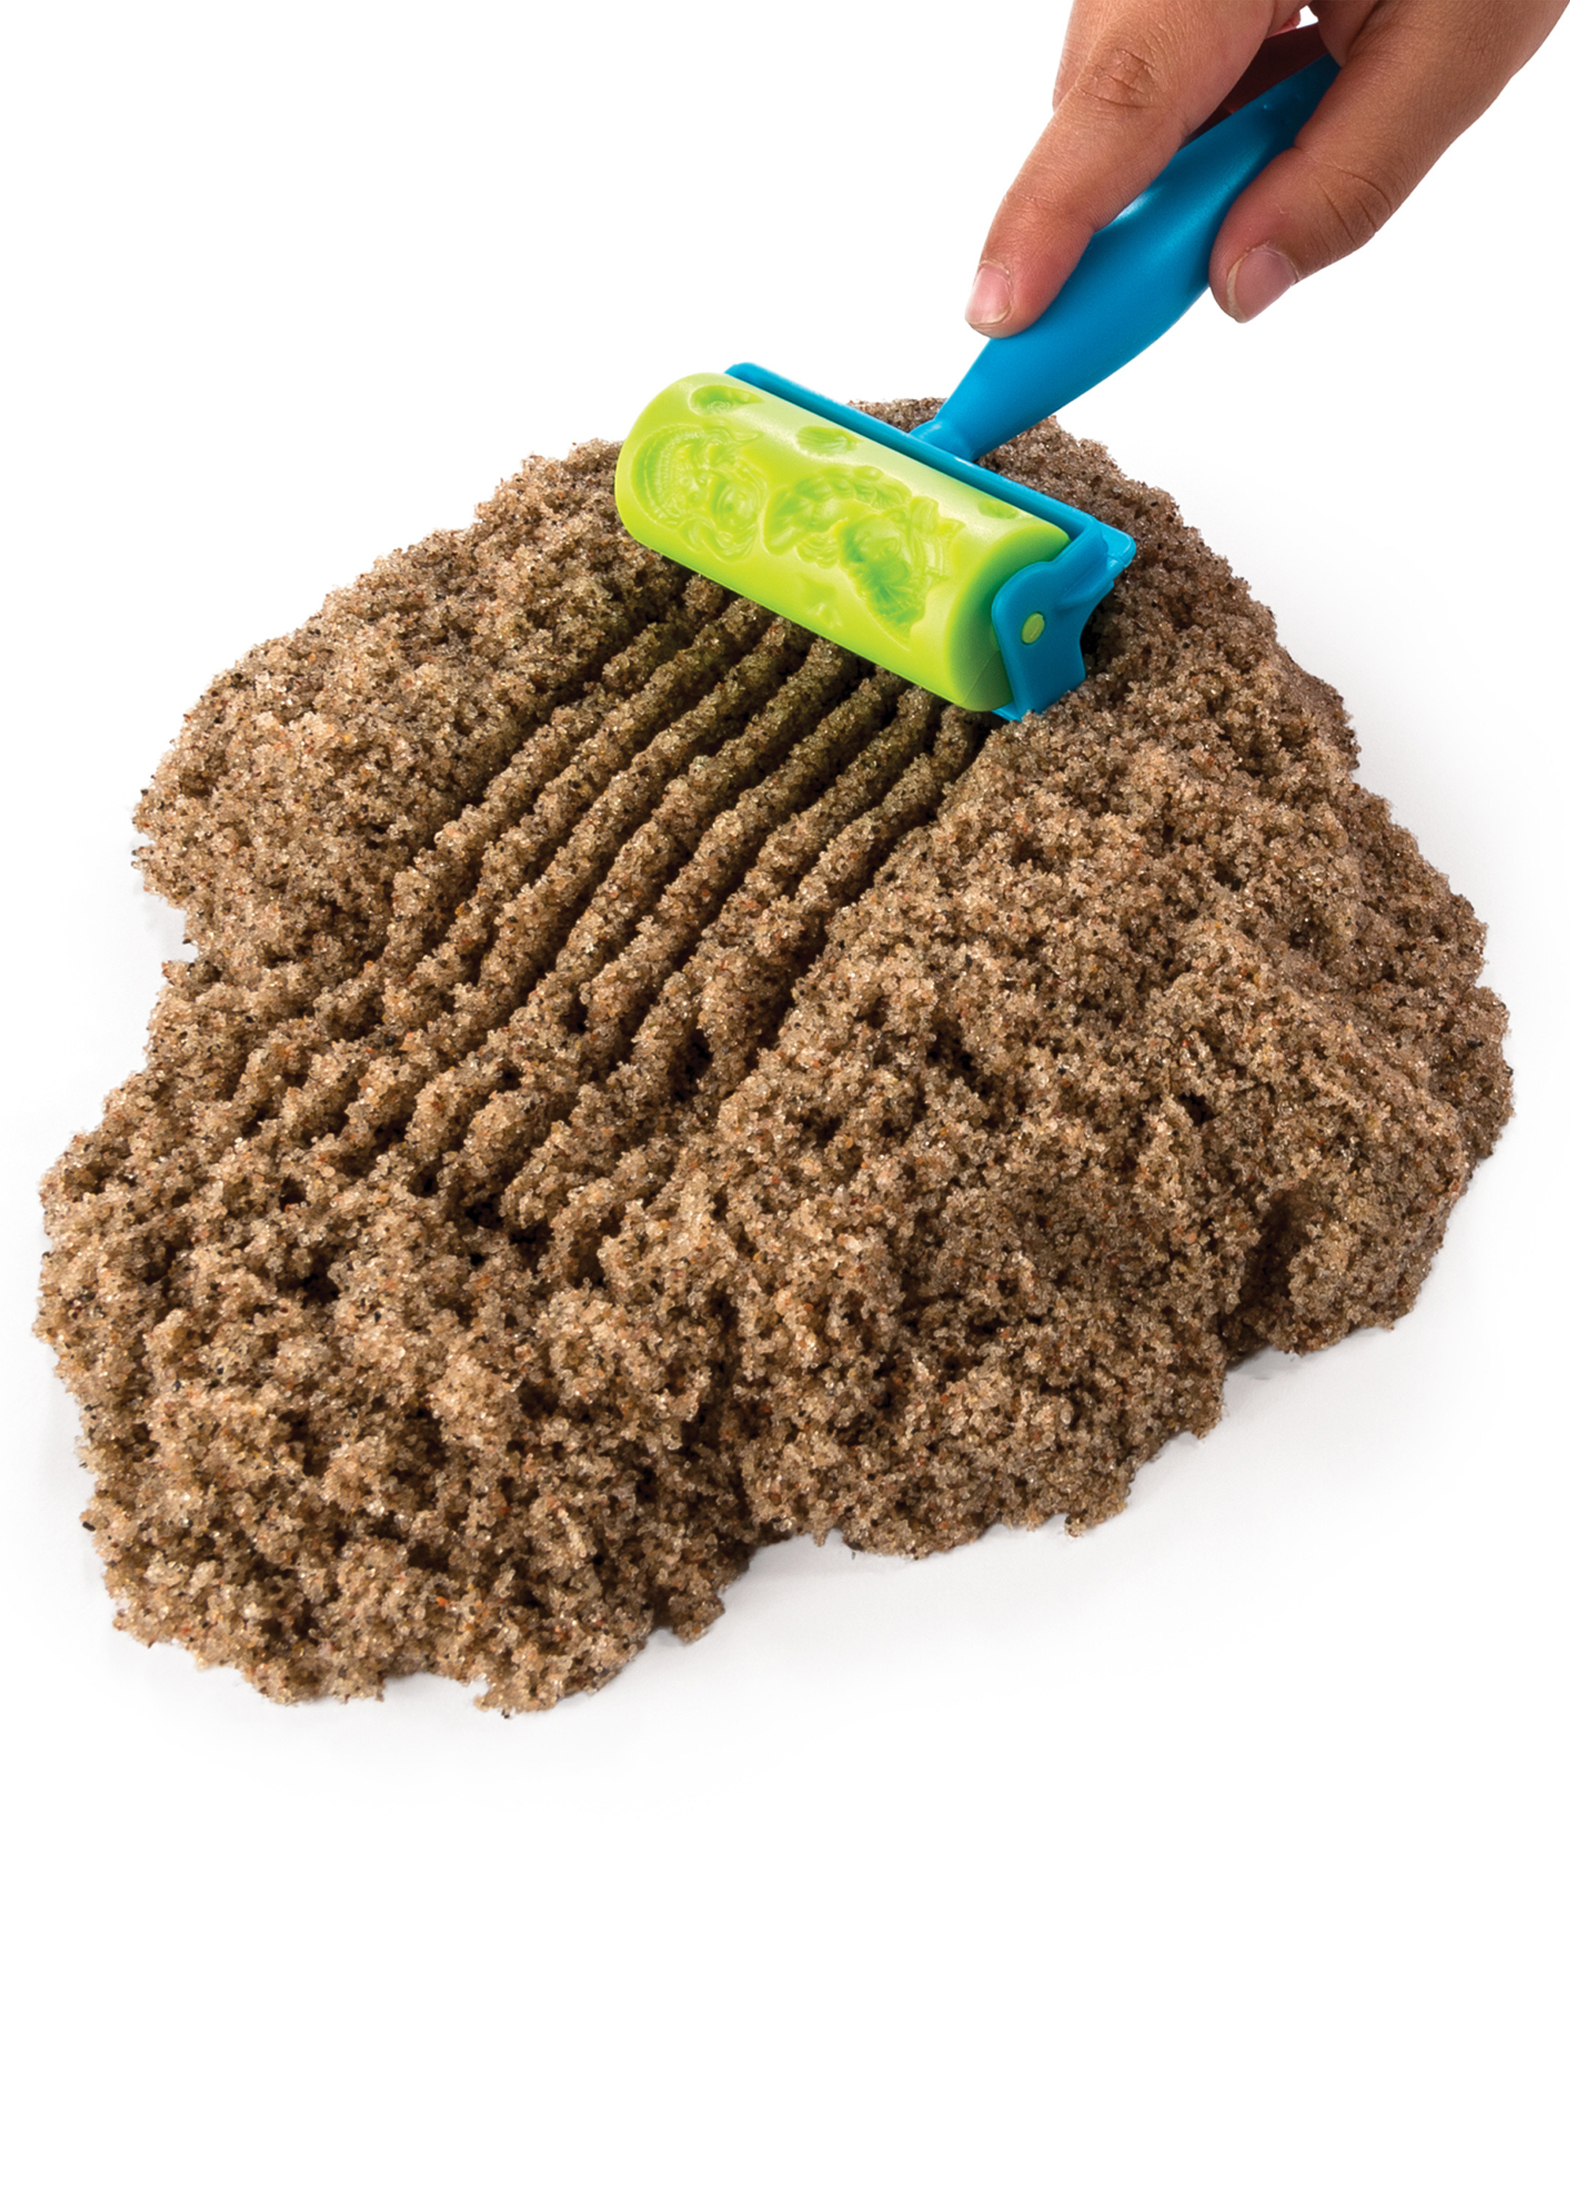 Kinetic Sand - Beach Day Fun Kit 340 g image number 1